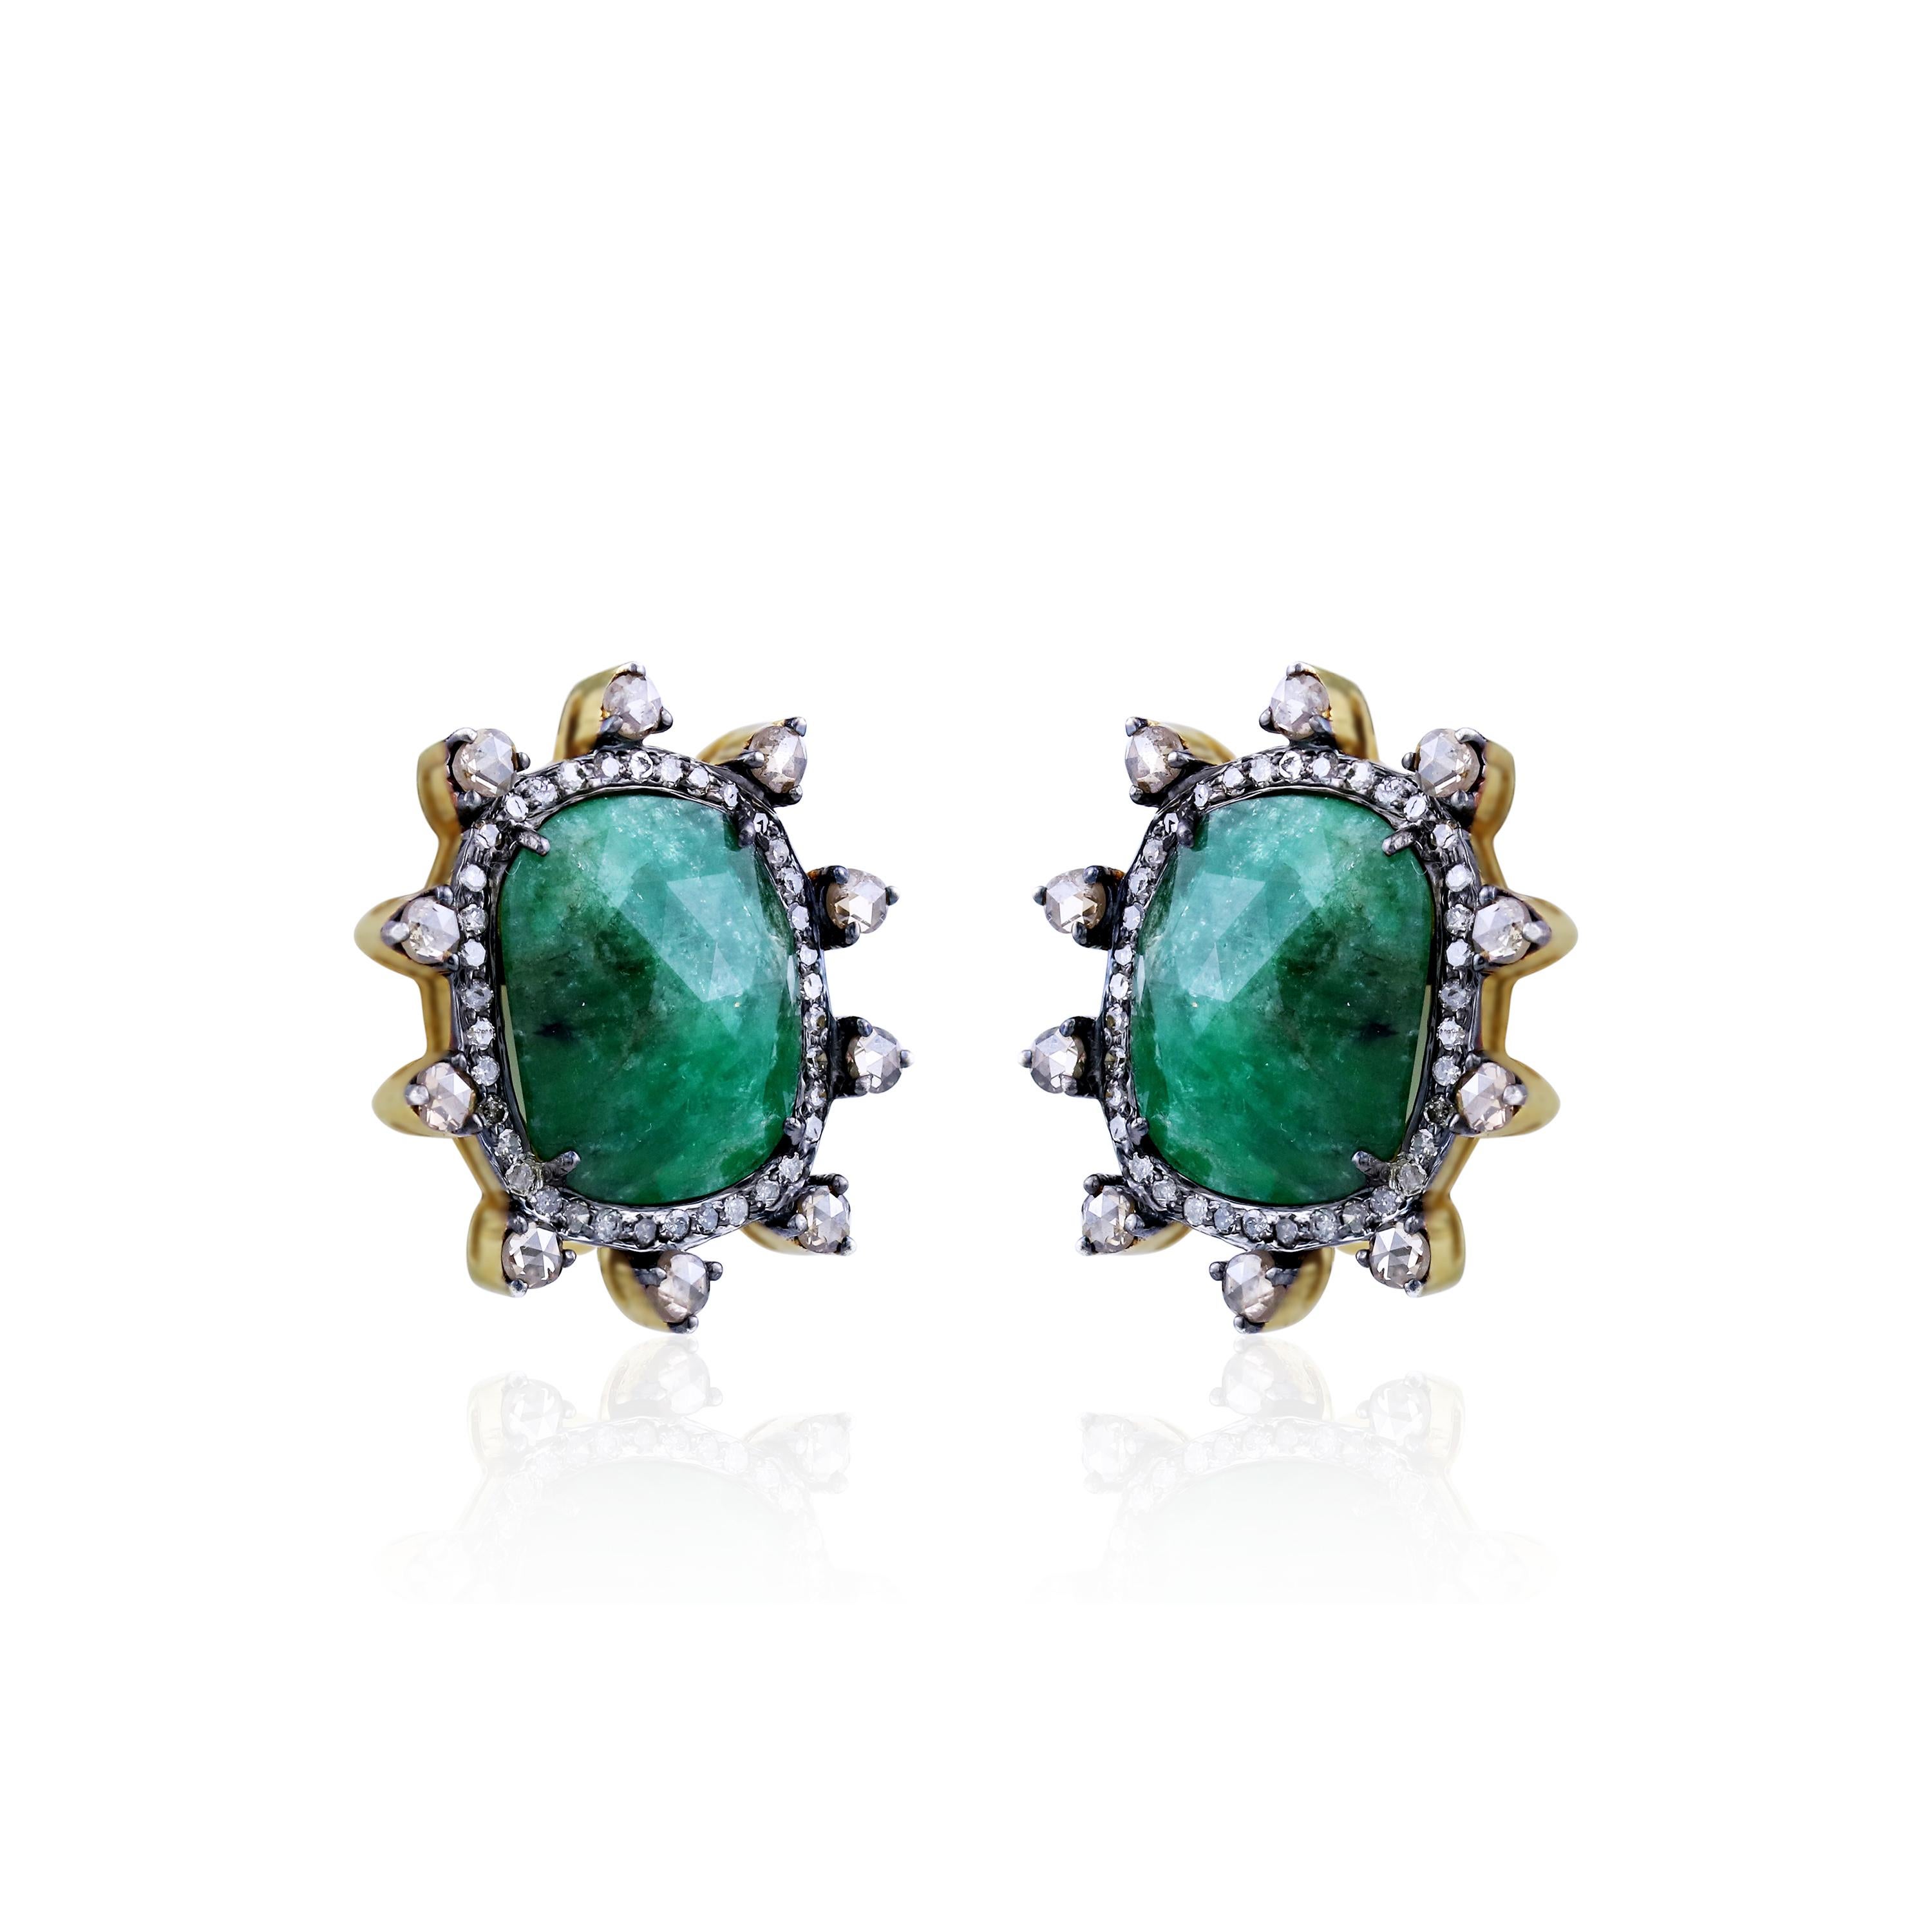 This vintage Gemistry Victorian  stud earrings features 10 Cts. cushion cut emeralds at the center enclosed in a halo of pave white diamonds. The pave white diamonds mounted on black rhodium polished 18K Yellow Gold and 925 Sterling Silver present a